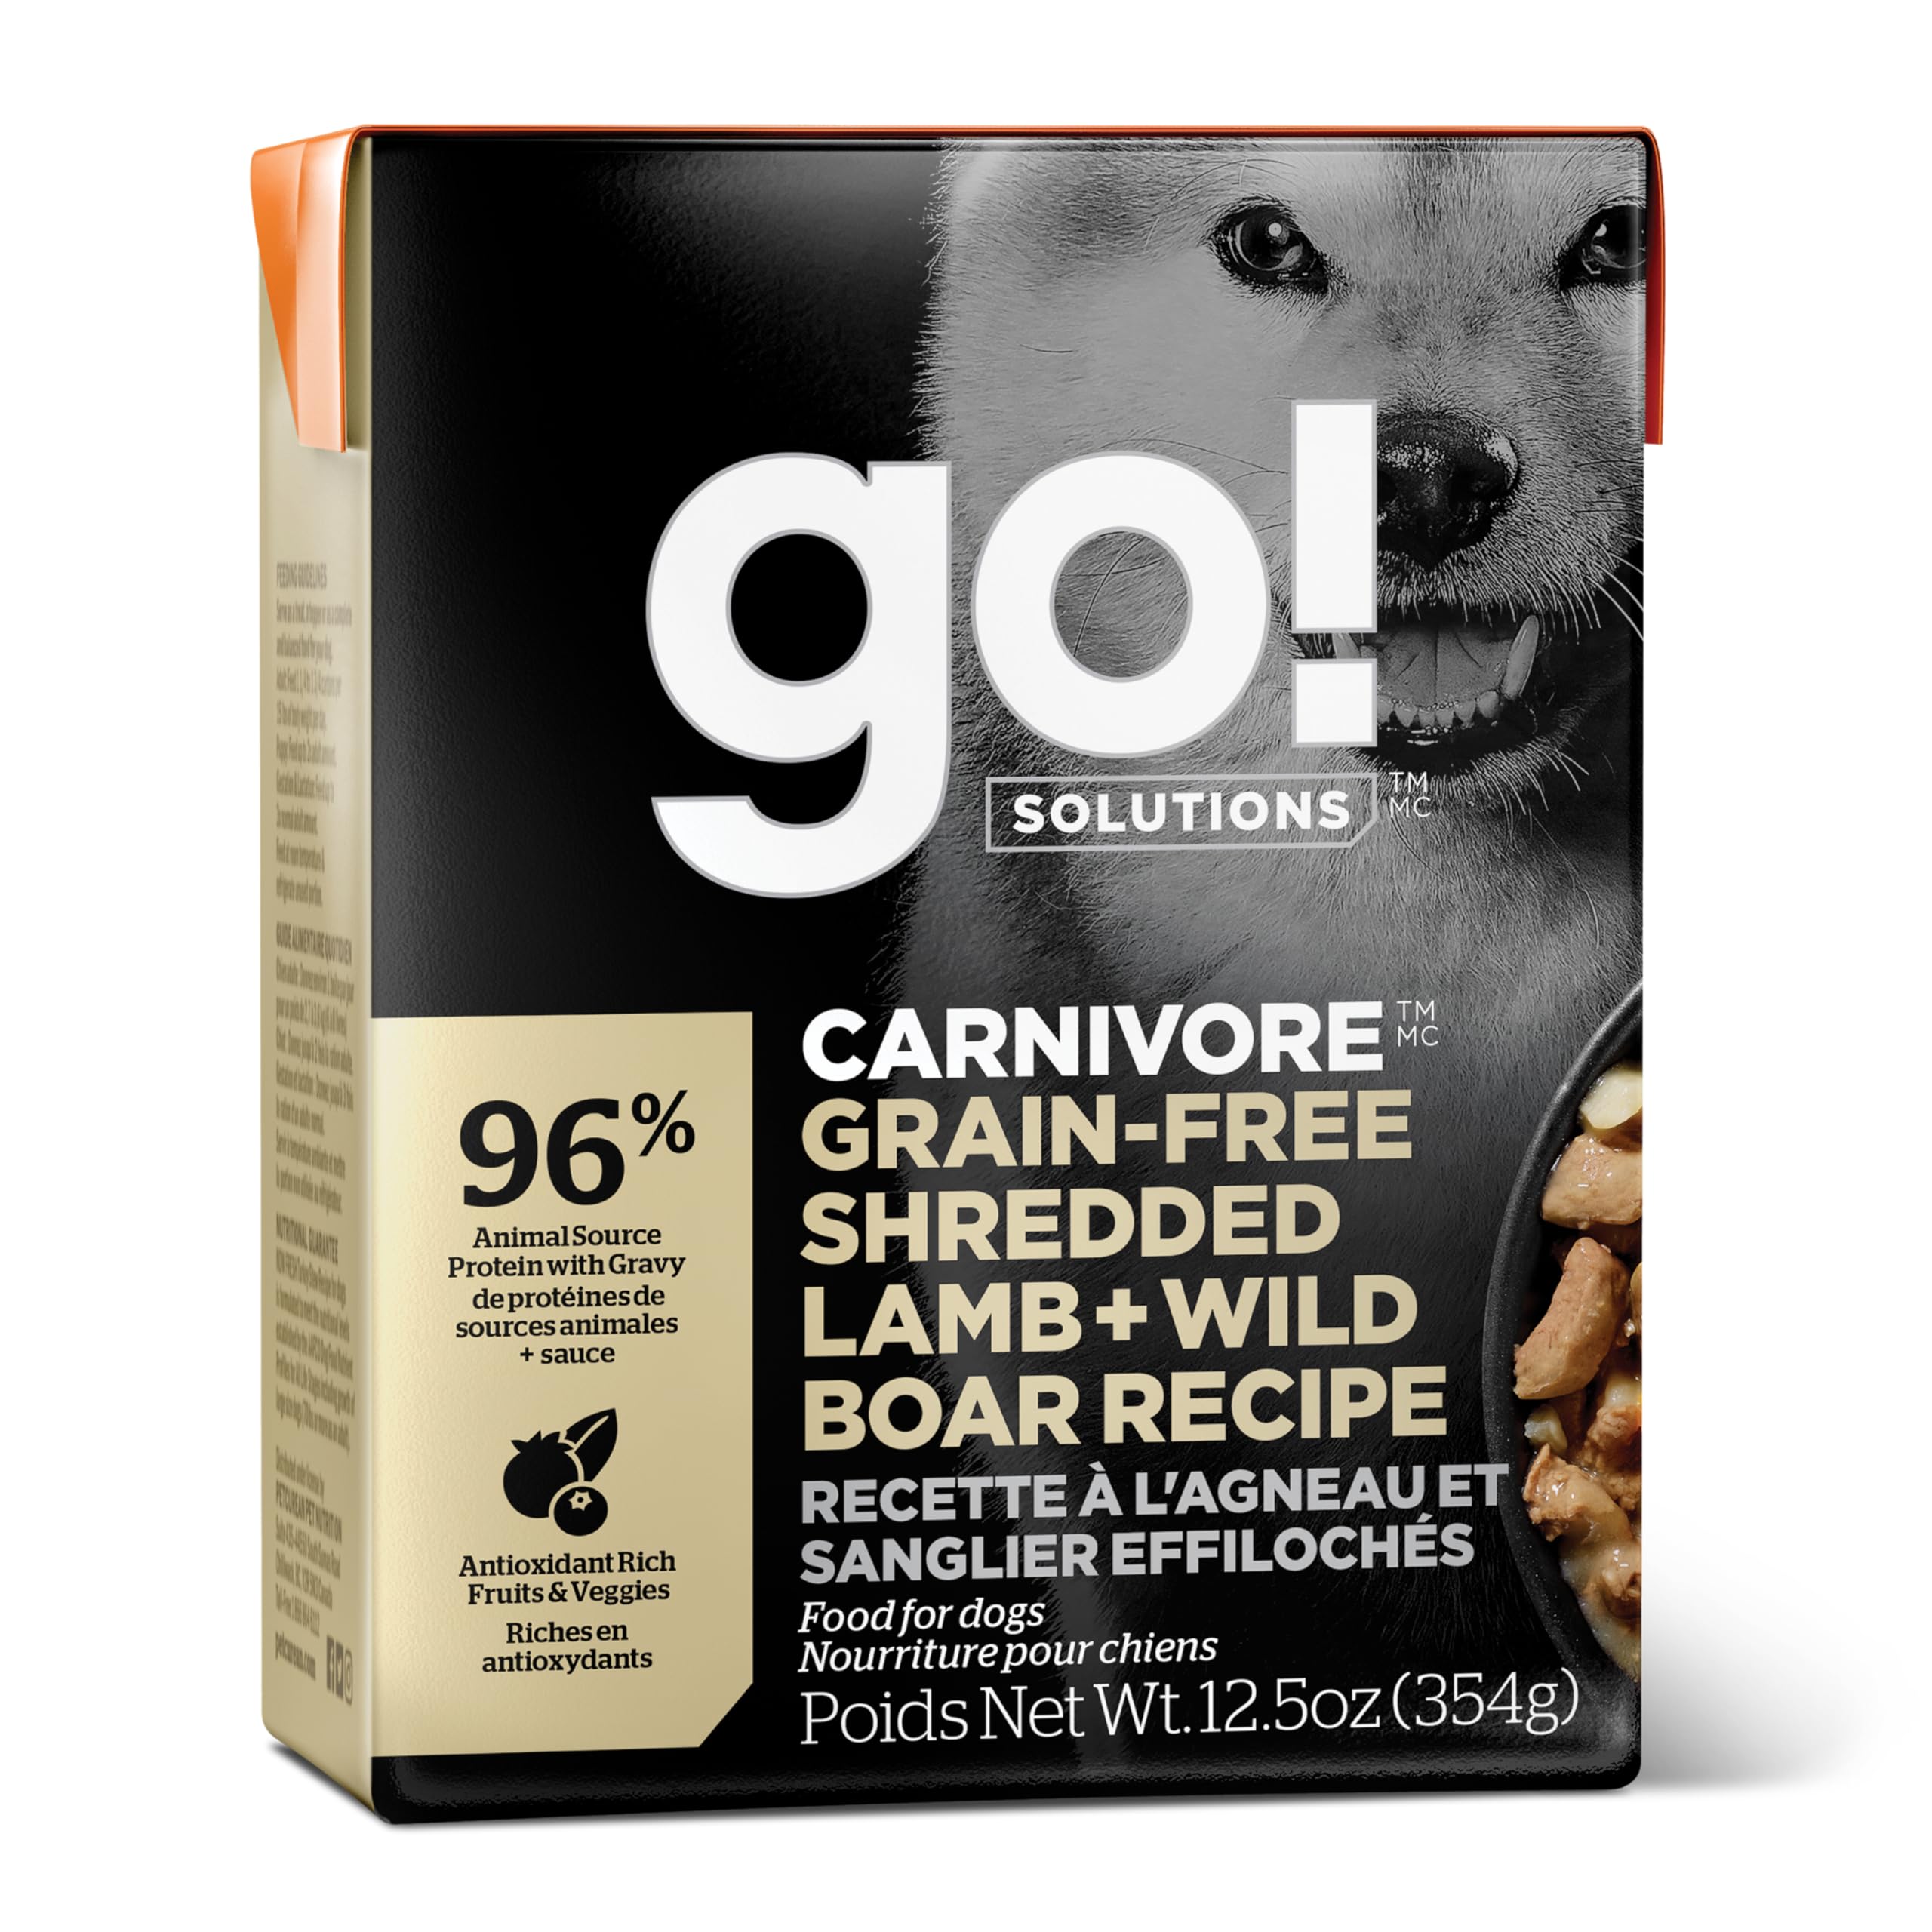 GO! SOLUTIONS Carnivore Protein Rich Wet Dog Food - Grain Free Shredded Lamb and Wild Boar - Complete & Balanced Nutrition for All Life Stages, 12.5 oz - $4.49 @ Amazon.com